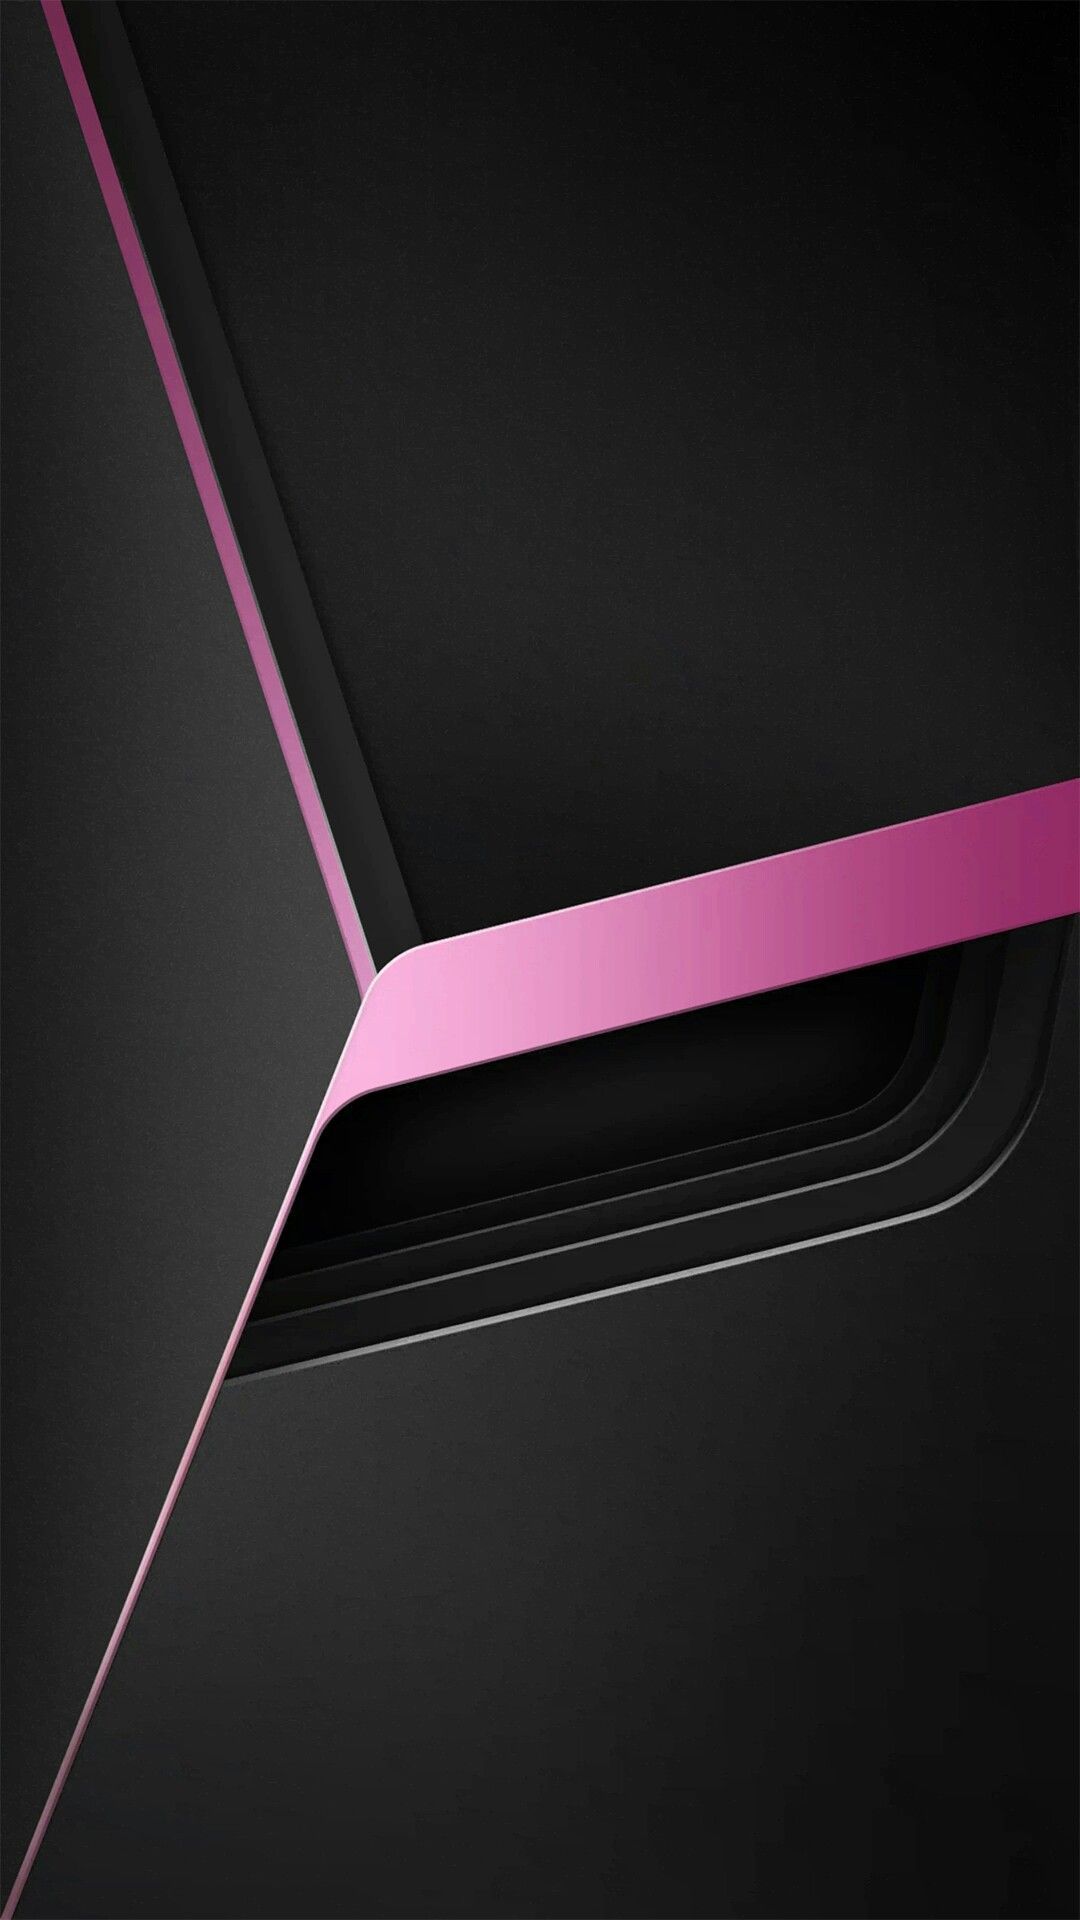 Aesthetic Black And Pink Wallpapers Wallpaper Cave